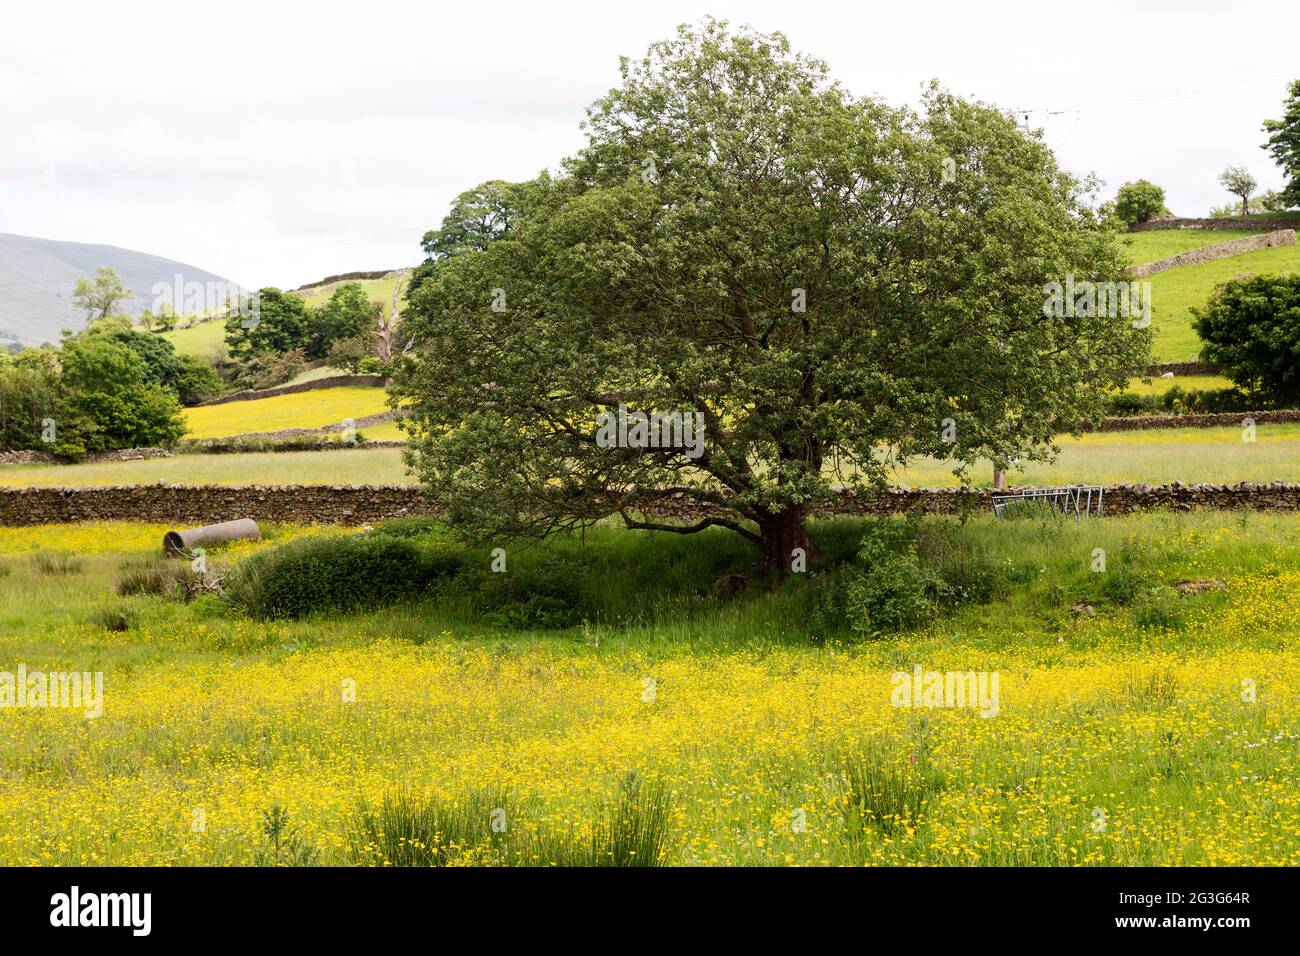 Yellow flowers in a felds near Sedbergh in Cumbria, England. Sedbergh is in the Yorkshire Dales National Park. Stock Photo